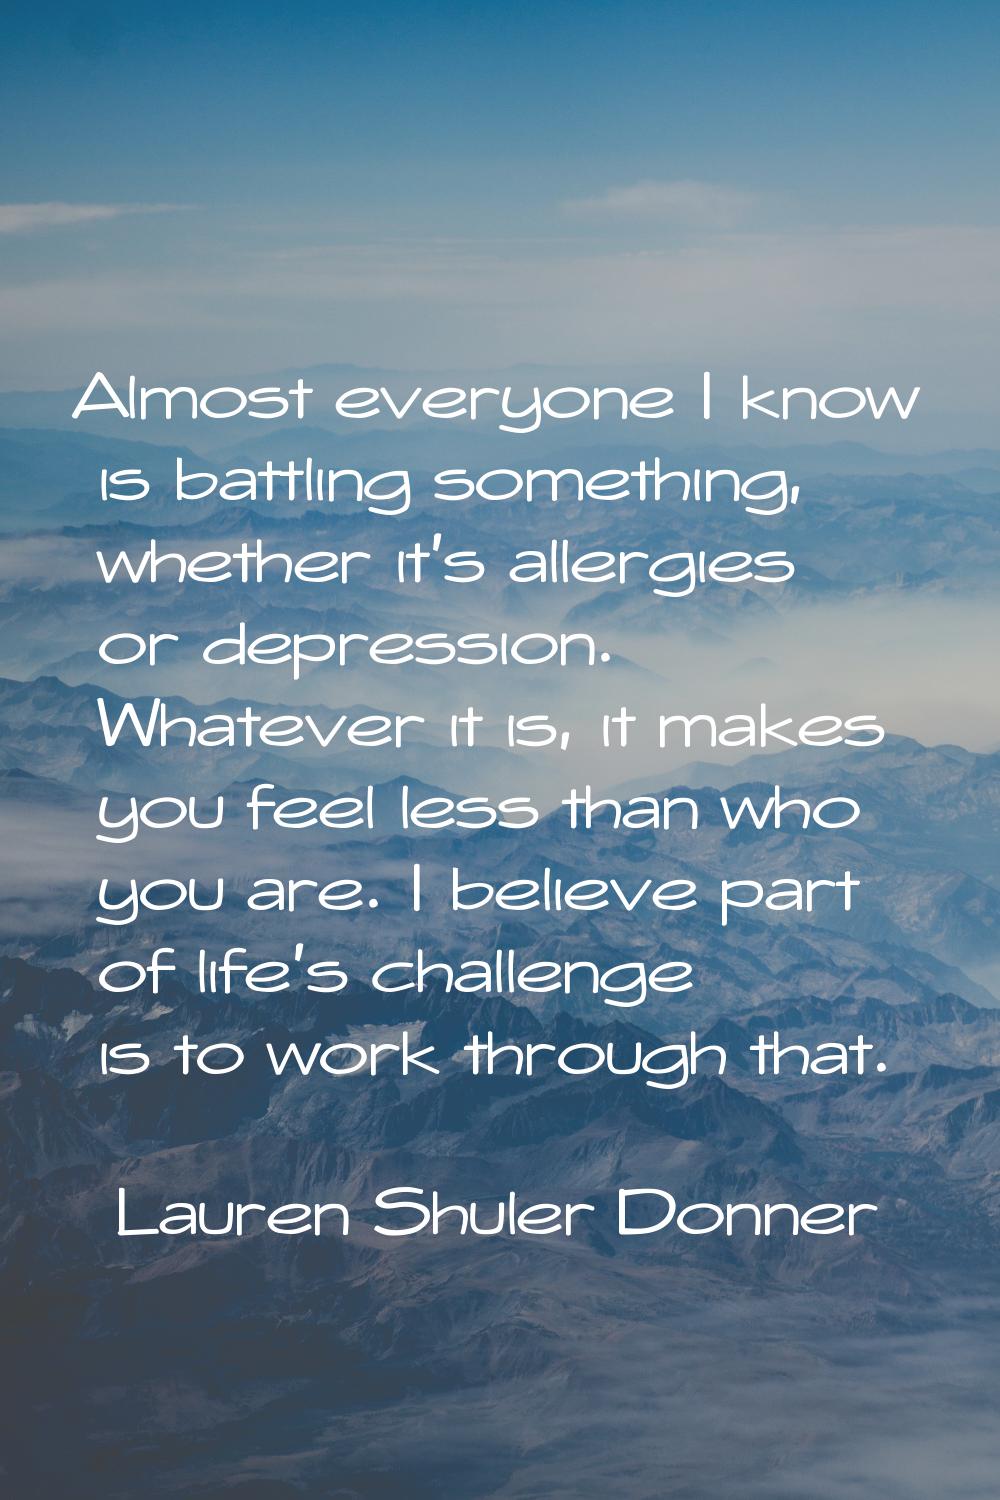 Almost everyone I know is battling something, whether it's allergies or depression. Whatever it is,